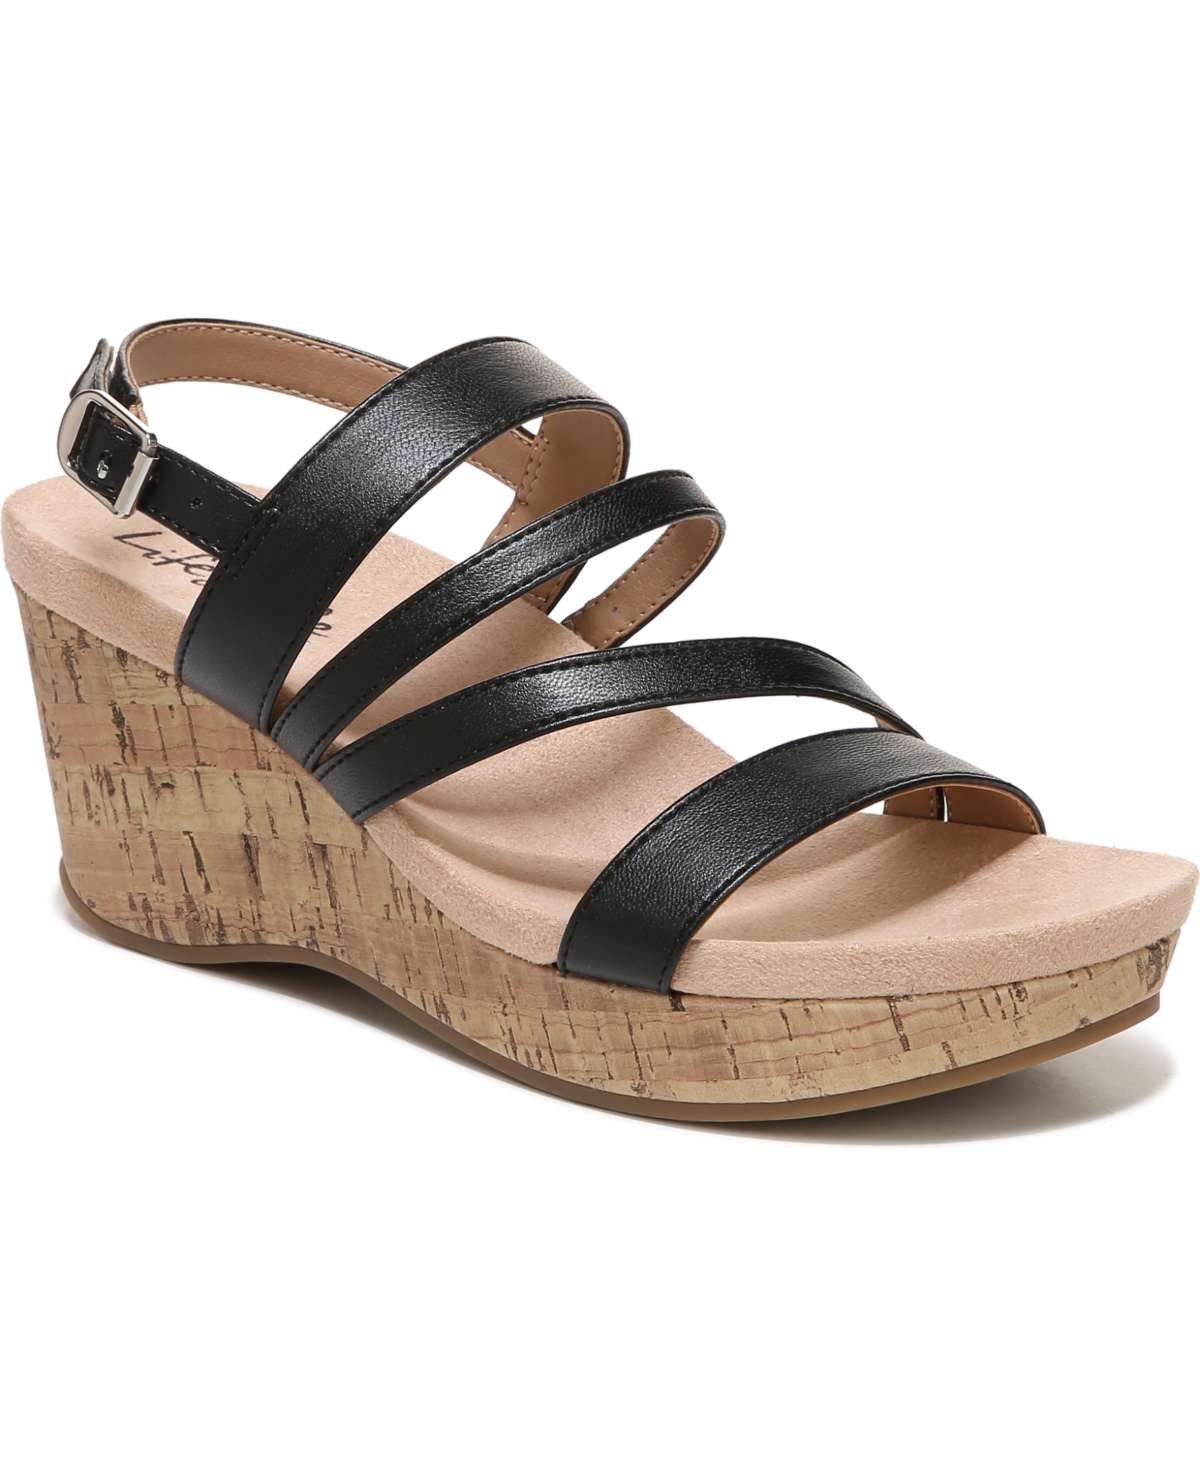 Discover Strappy Wedge Sandals - Black Faux Leather